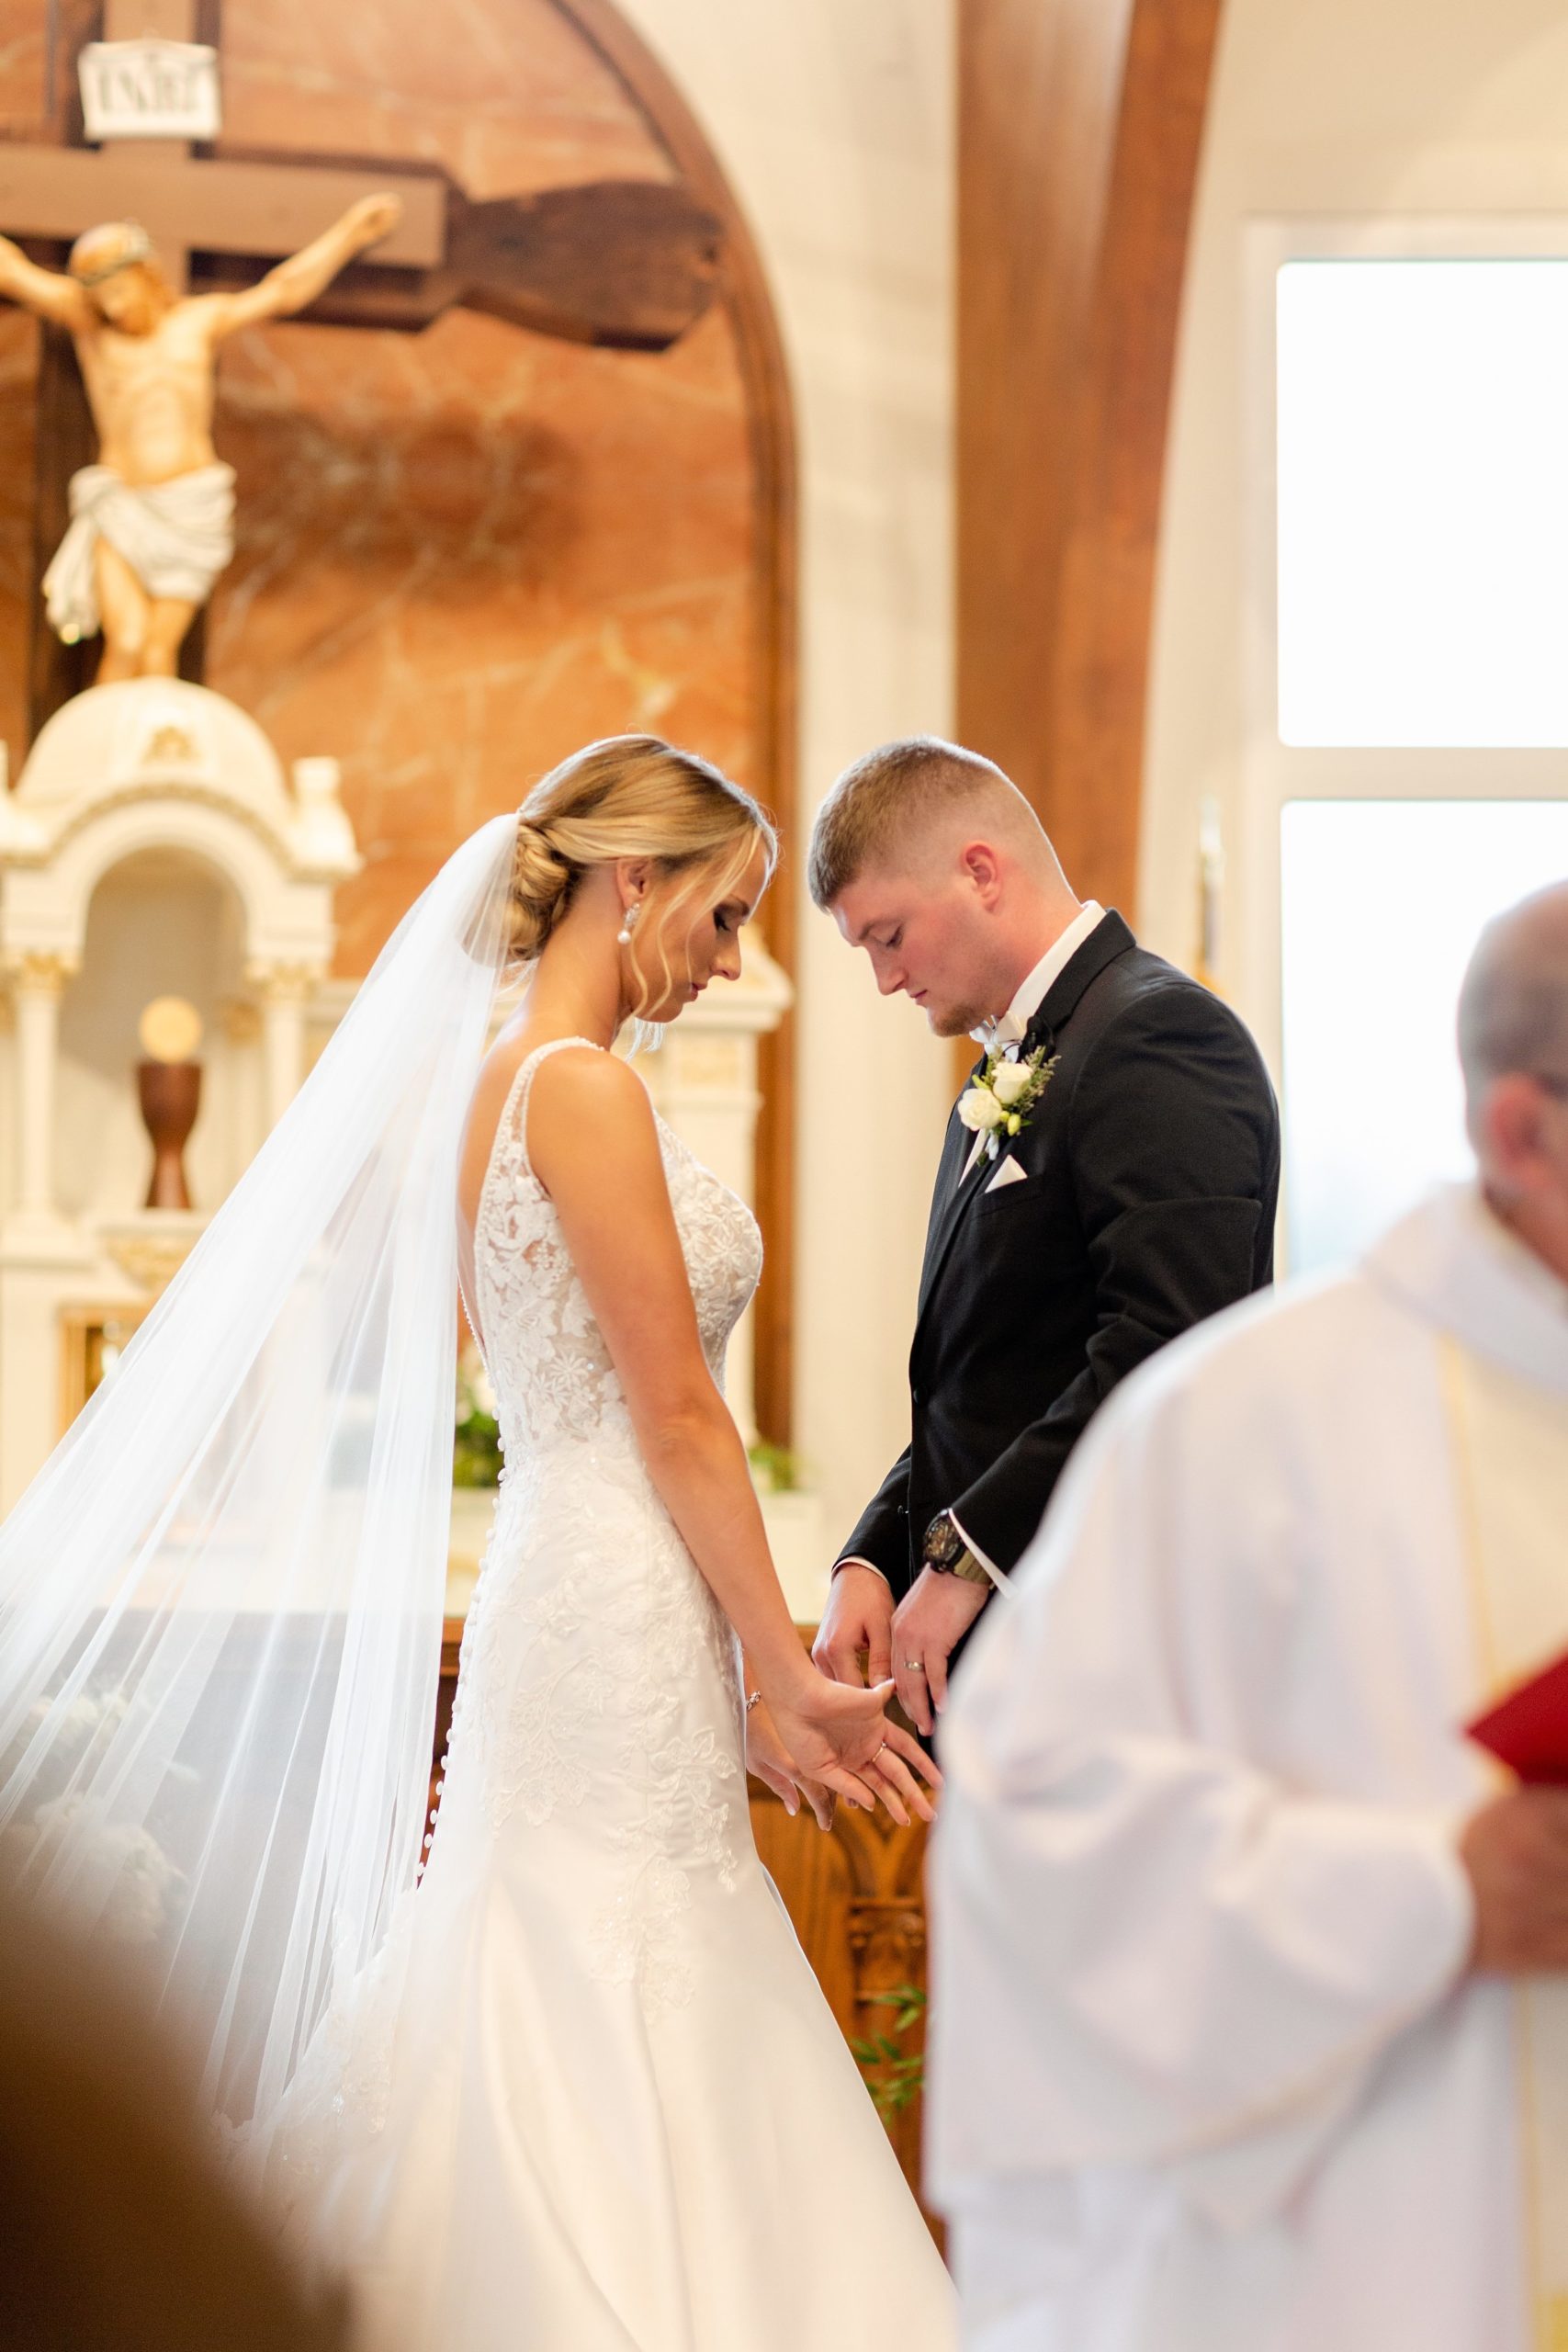 Hannah and Cody's Wedding in Booneville, IN147.jpg